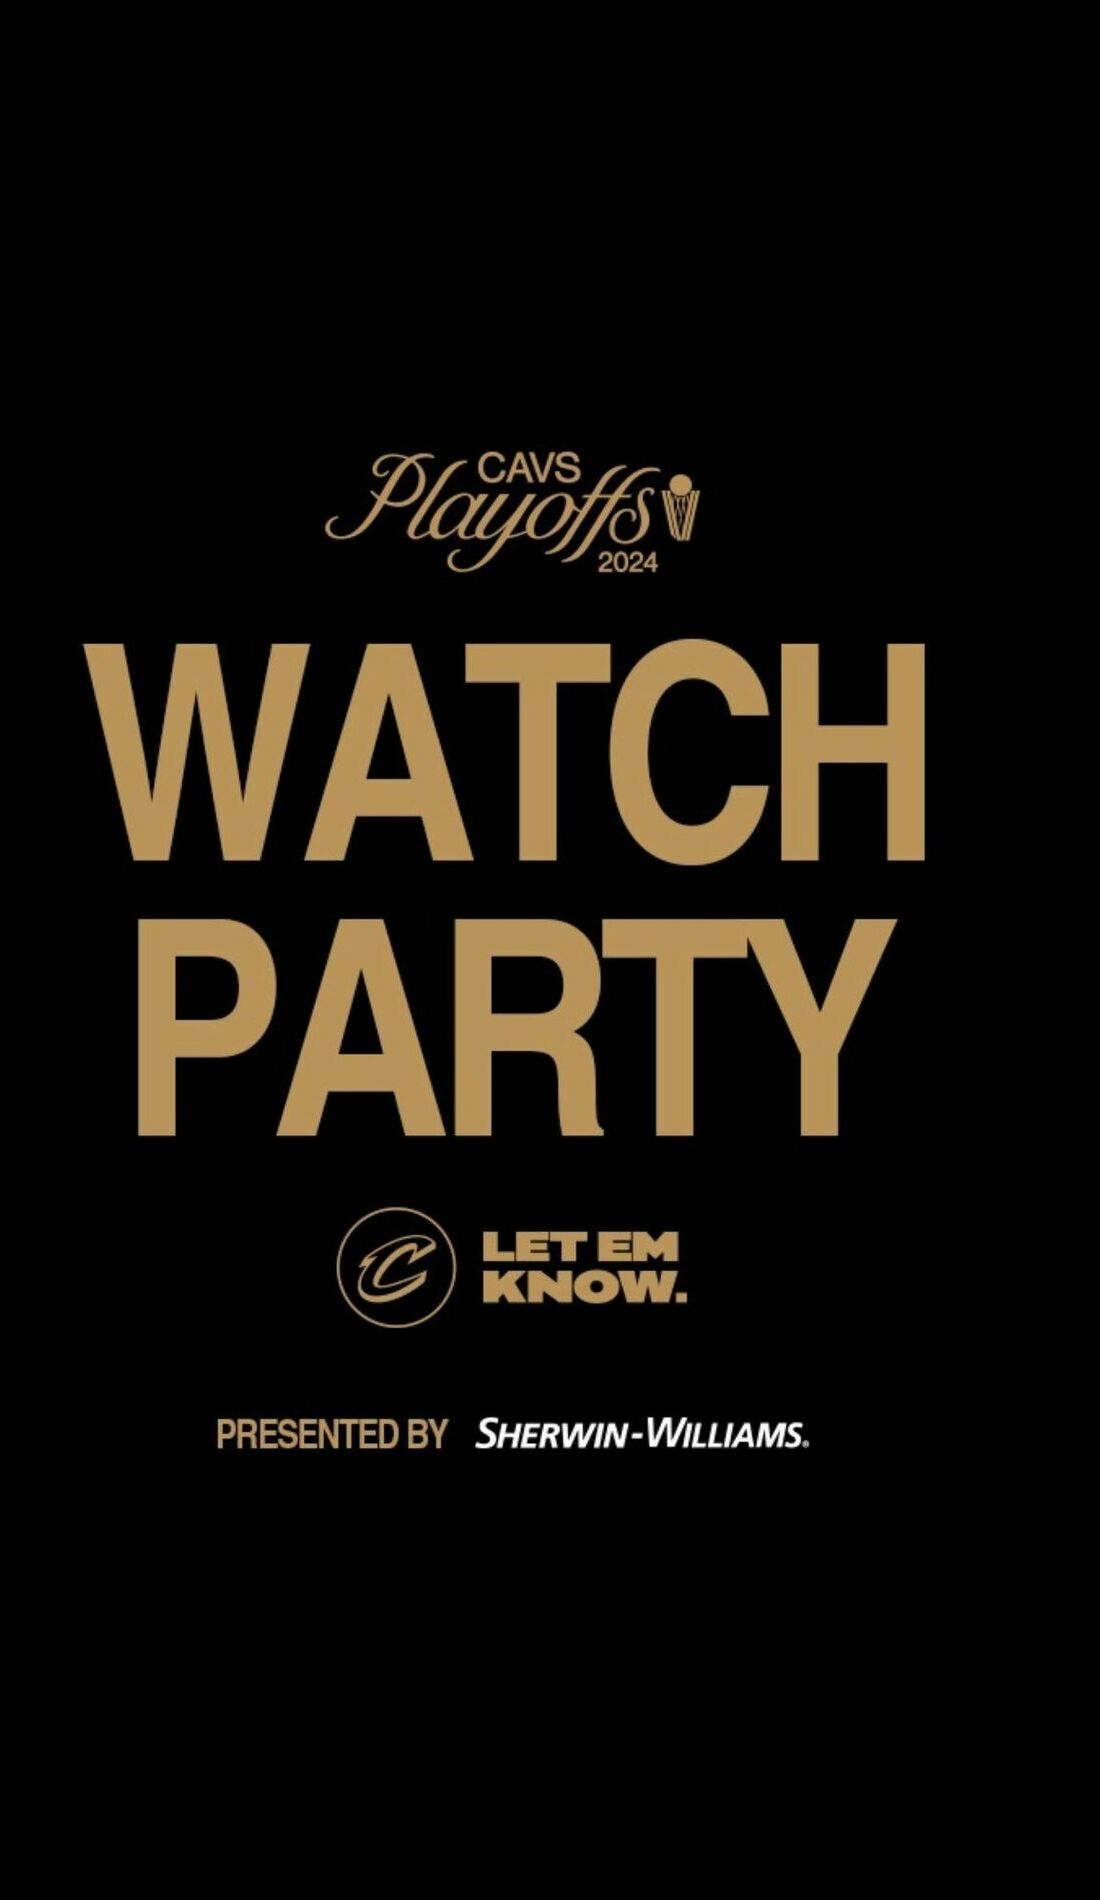 A Cavaliers Watch Party live event